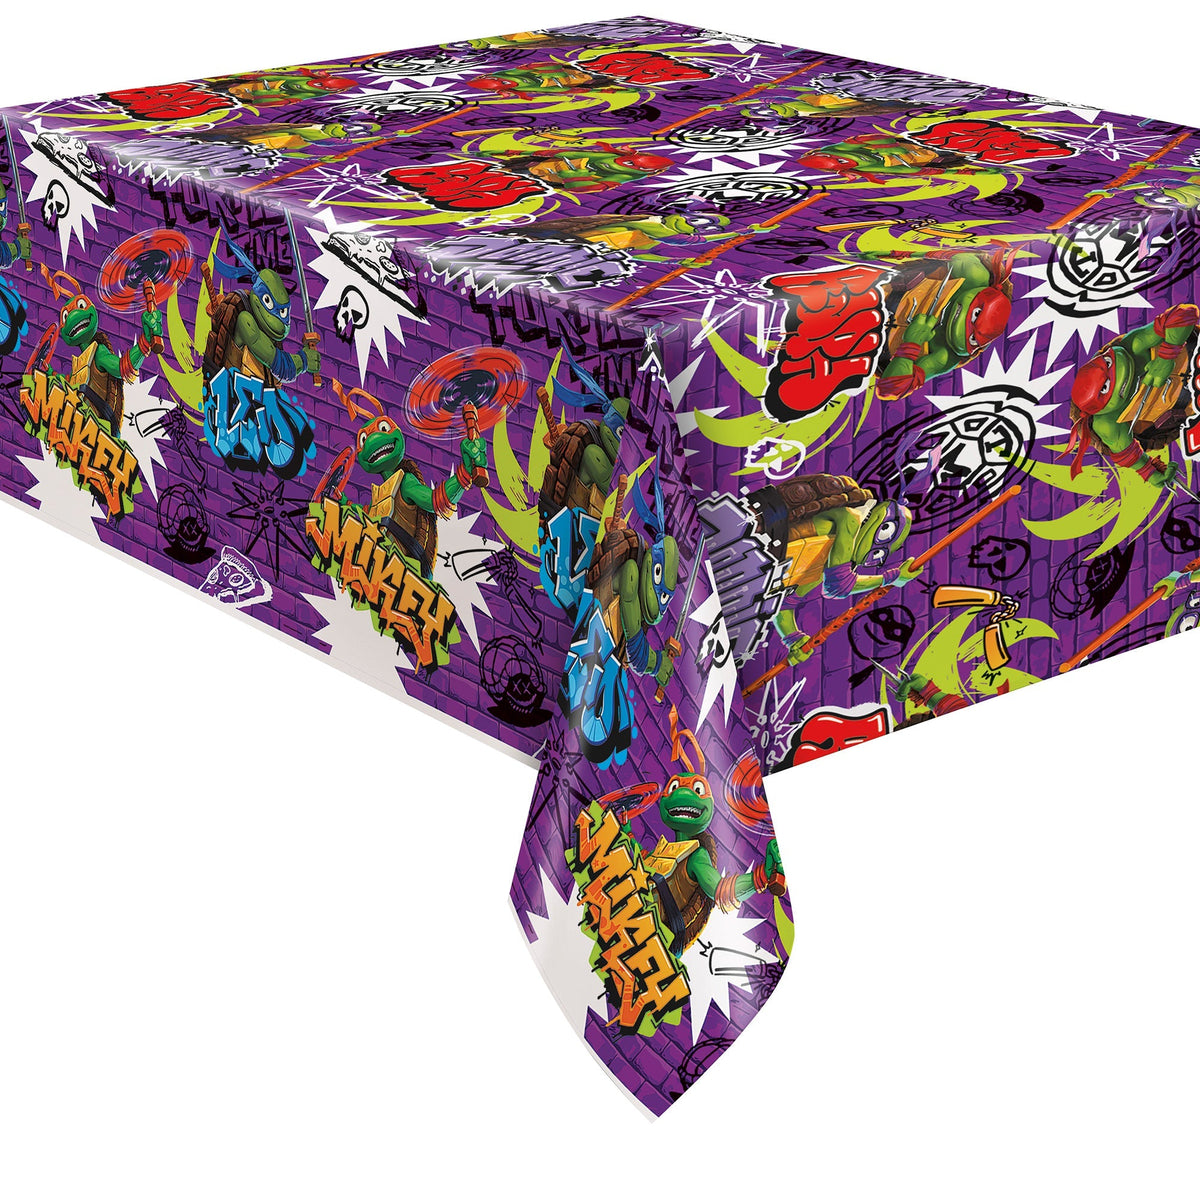 UNIQUE PARTY FAVORS Kids Birthday Ninja Turtles: Mutant Mayhem Birthday Plastic Table Cover, 54 x 84 Inches, 1 Count